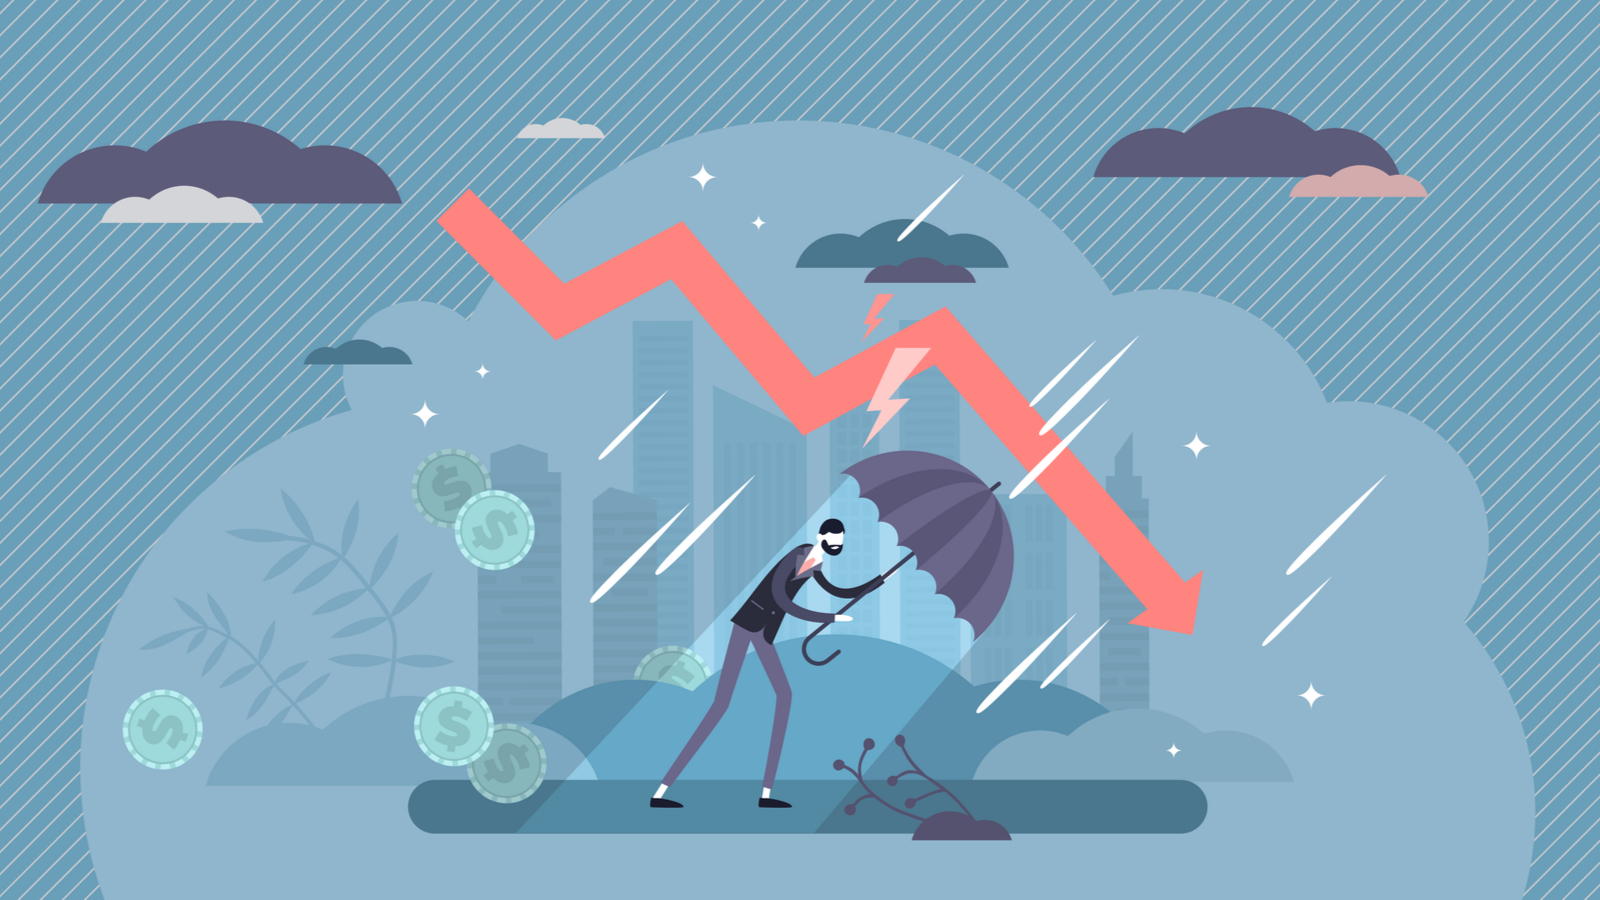 Illustration of a recession. Man in a storm with an umbrella as the markets crash.